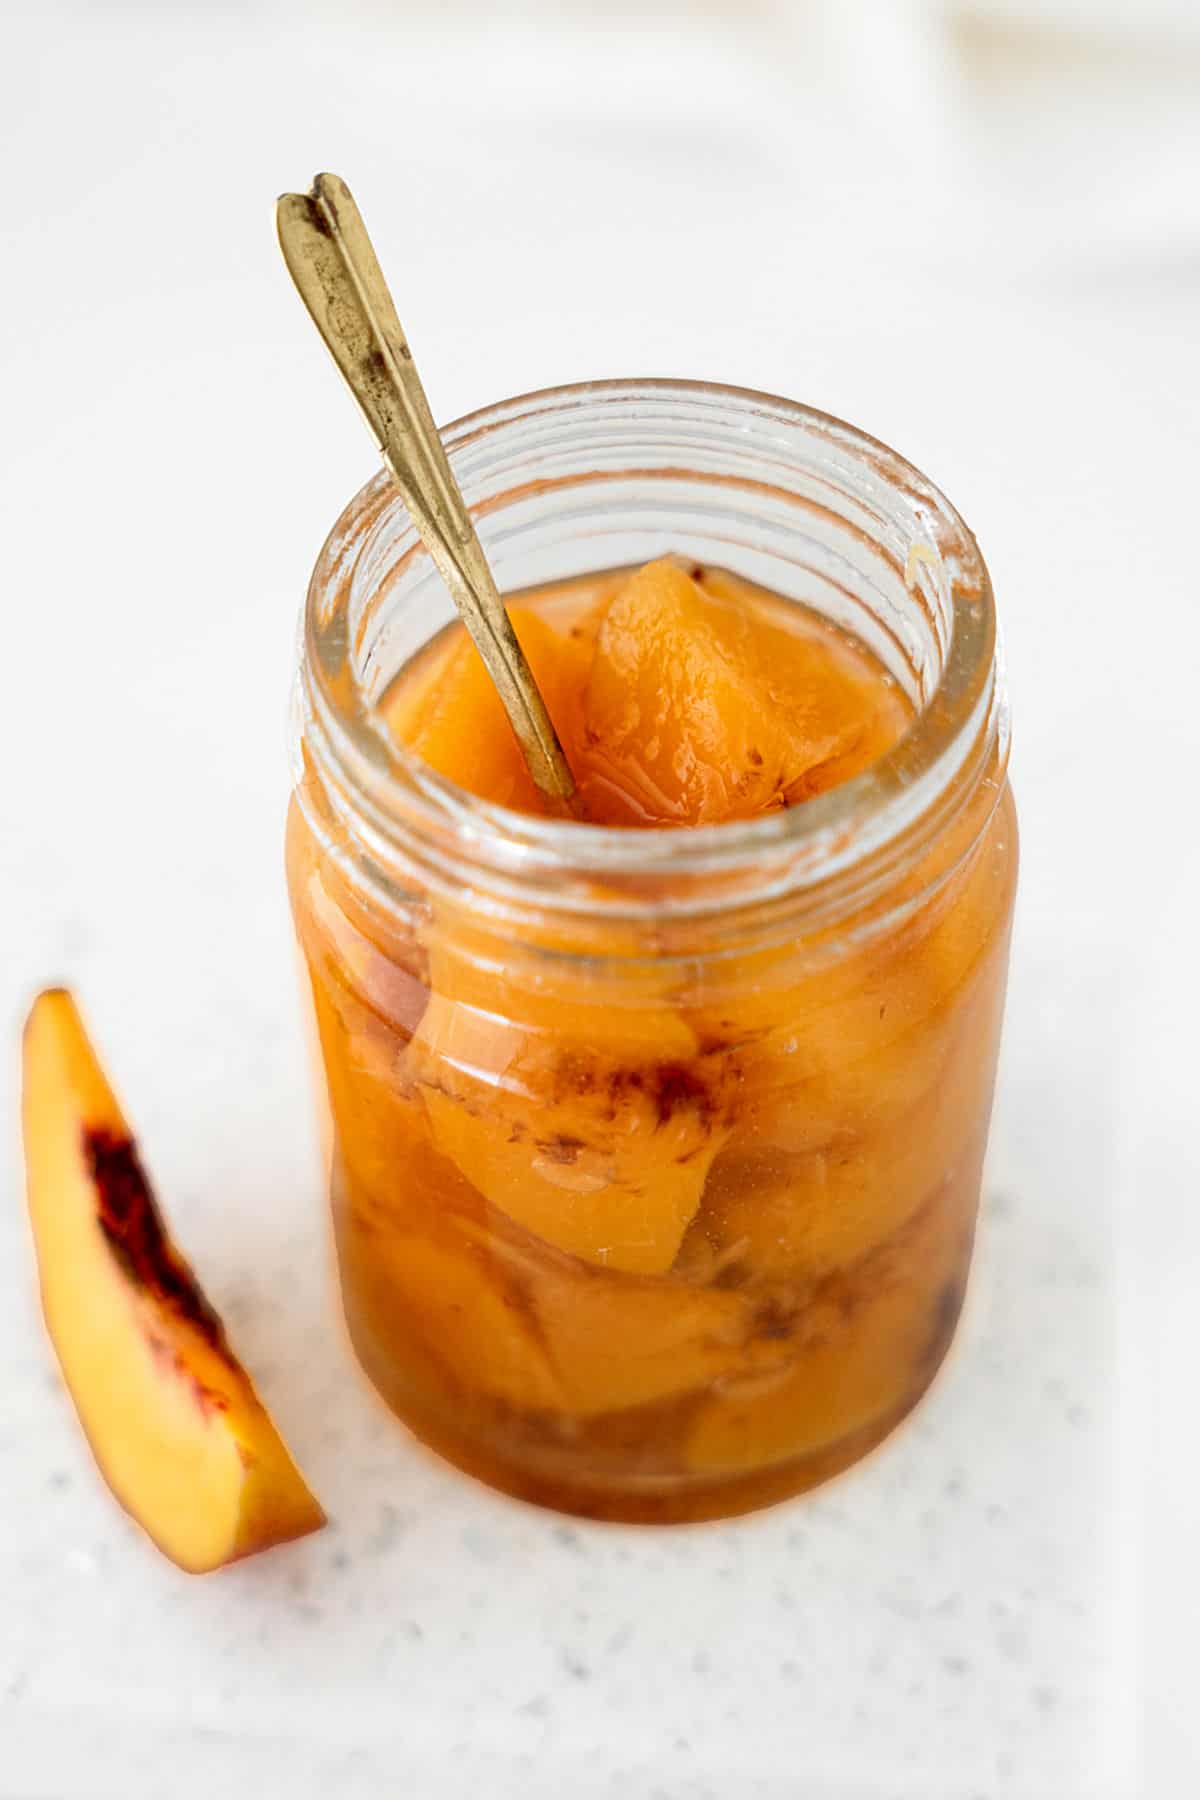 Glass jar with peach compote and a silver spoon on a white surface with a peach wedge.